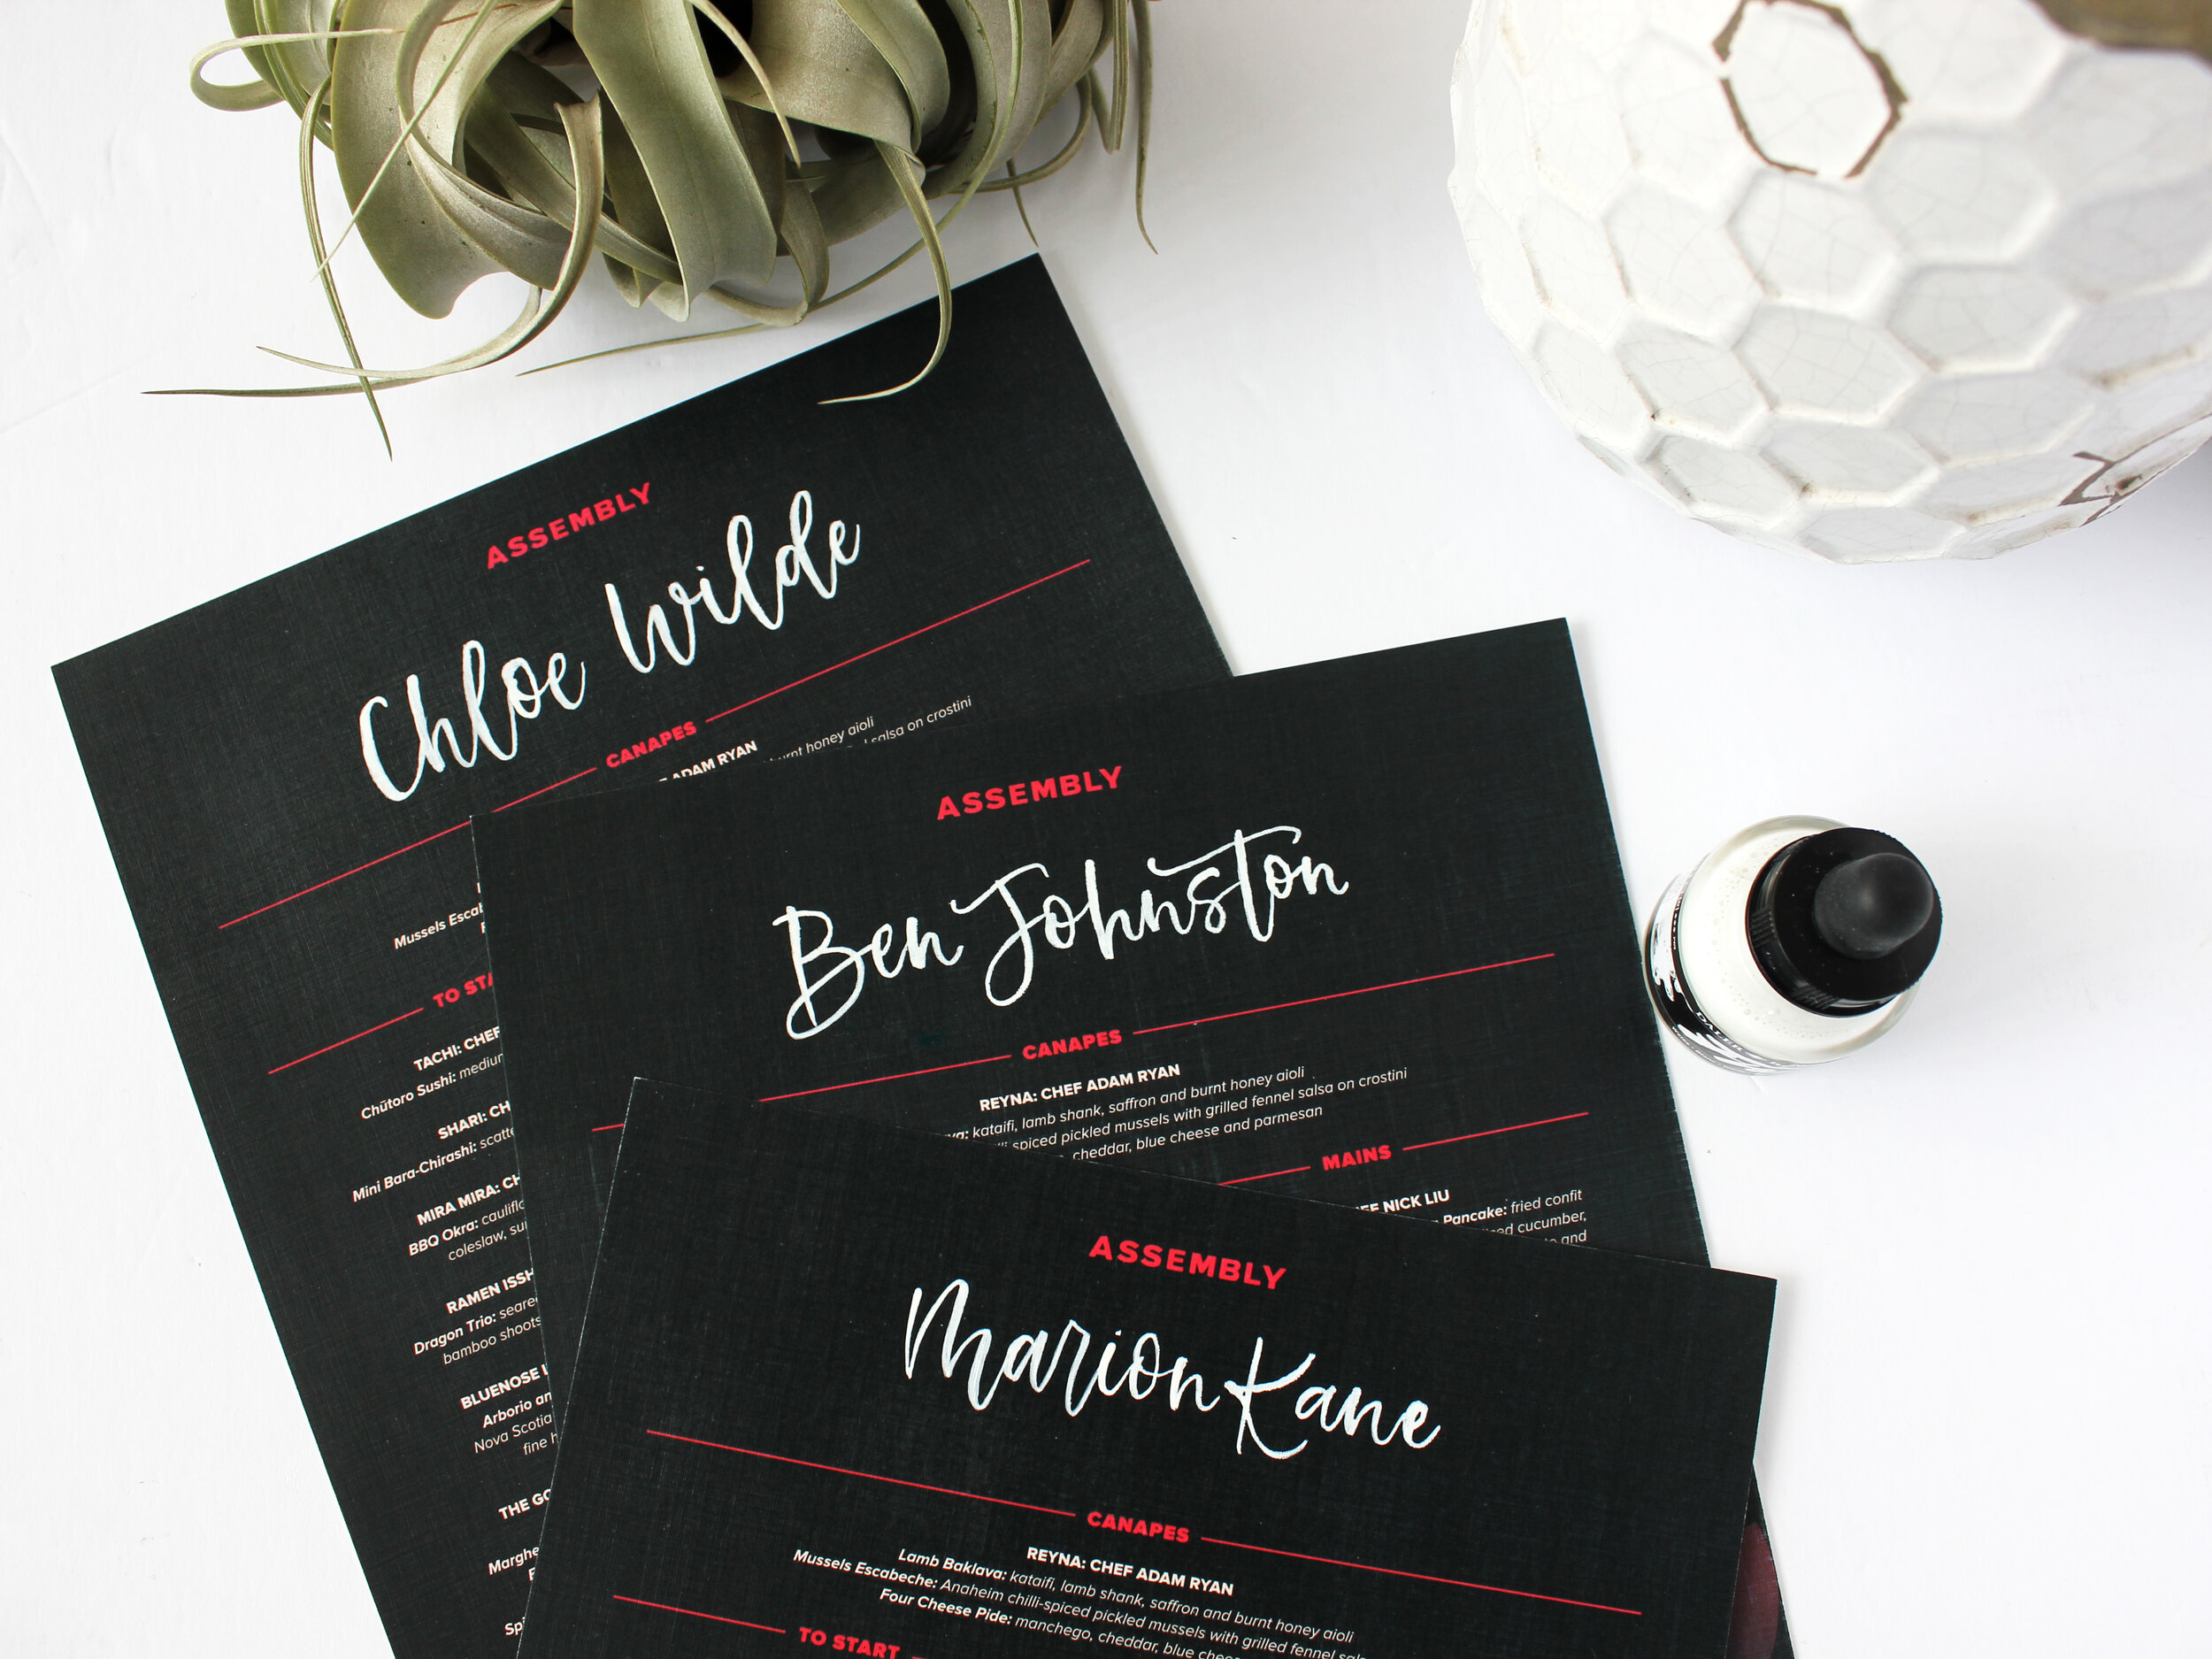 Personalized menus for the launch of Assembly Hall in Toronto